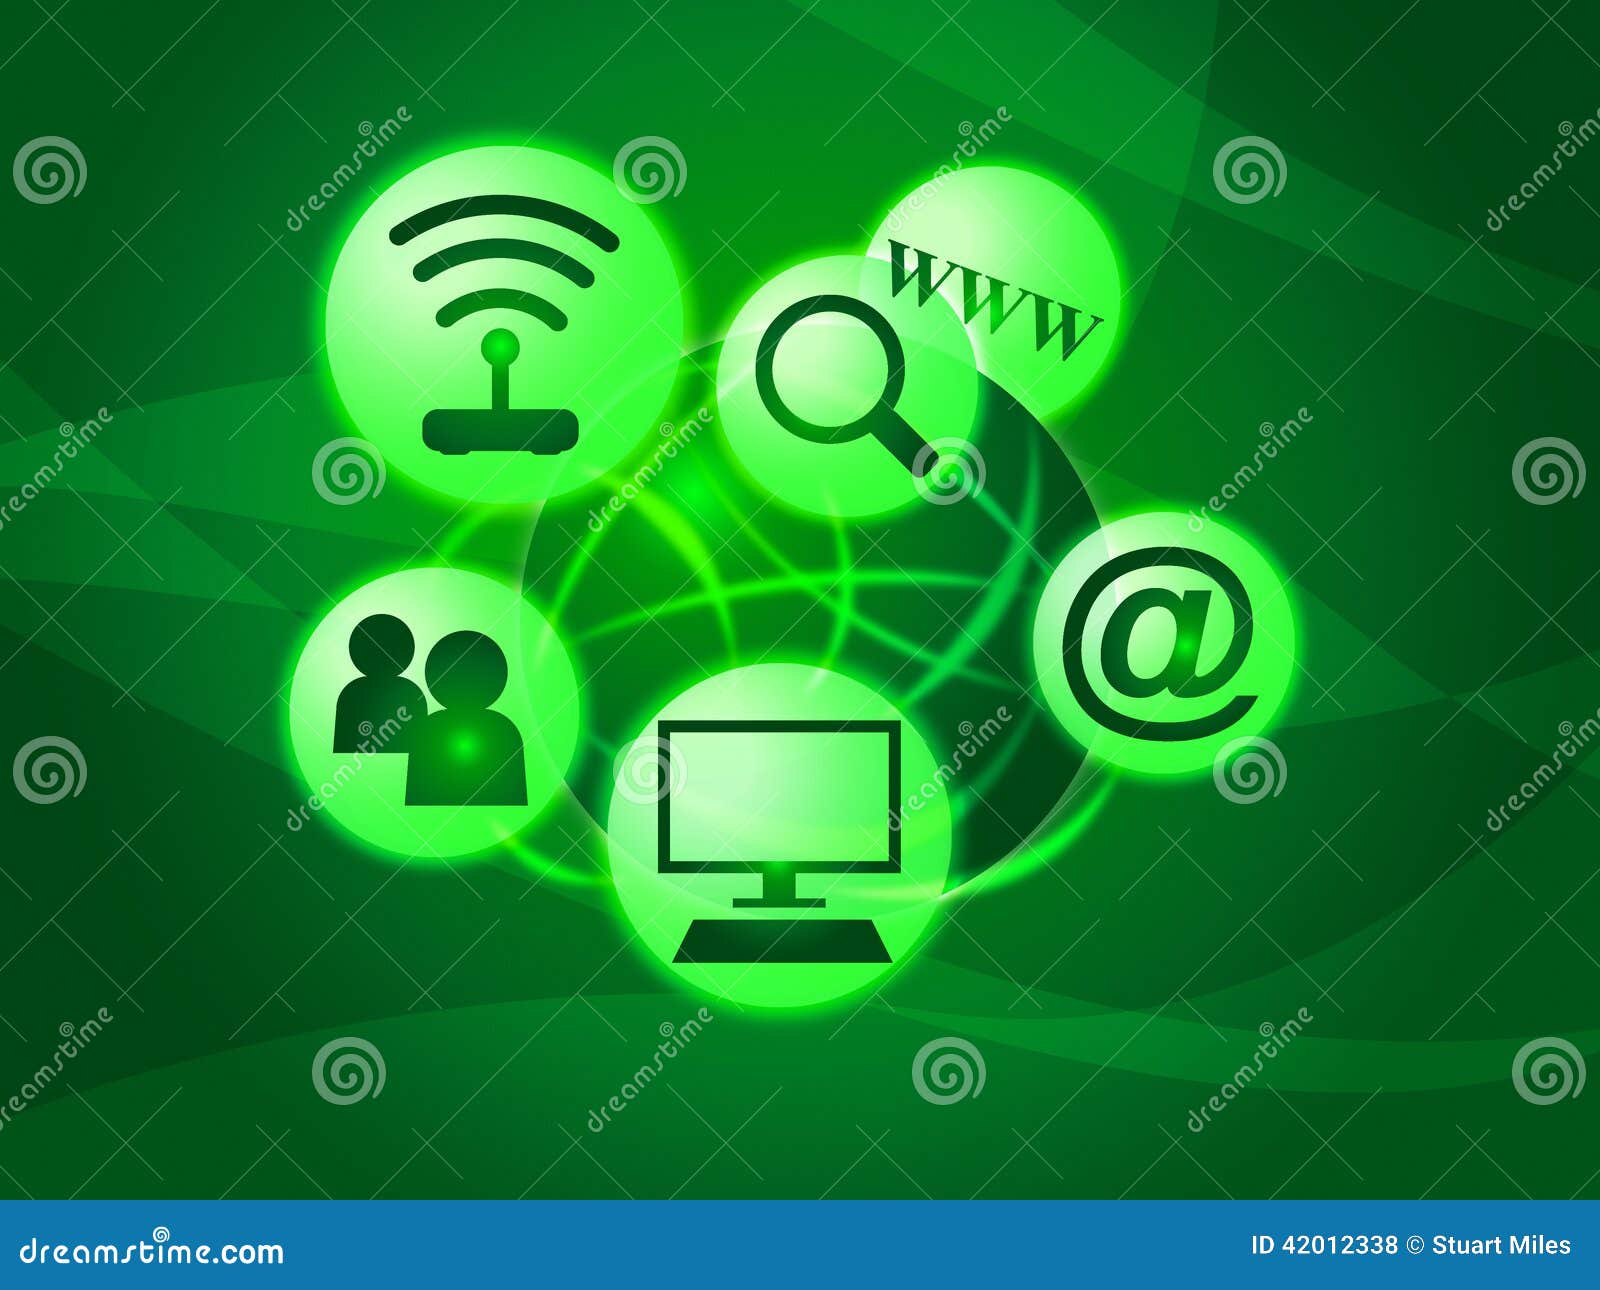 social-media-represents-world-wide-web-communication-showing-news-feed-42012338